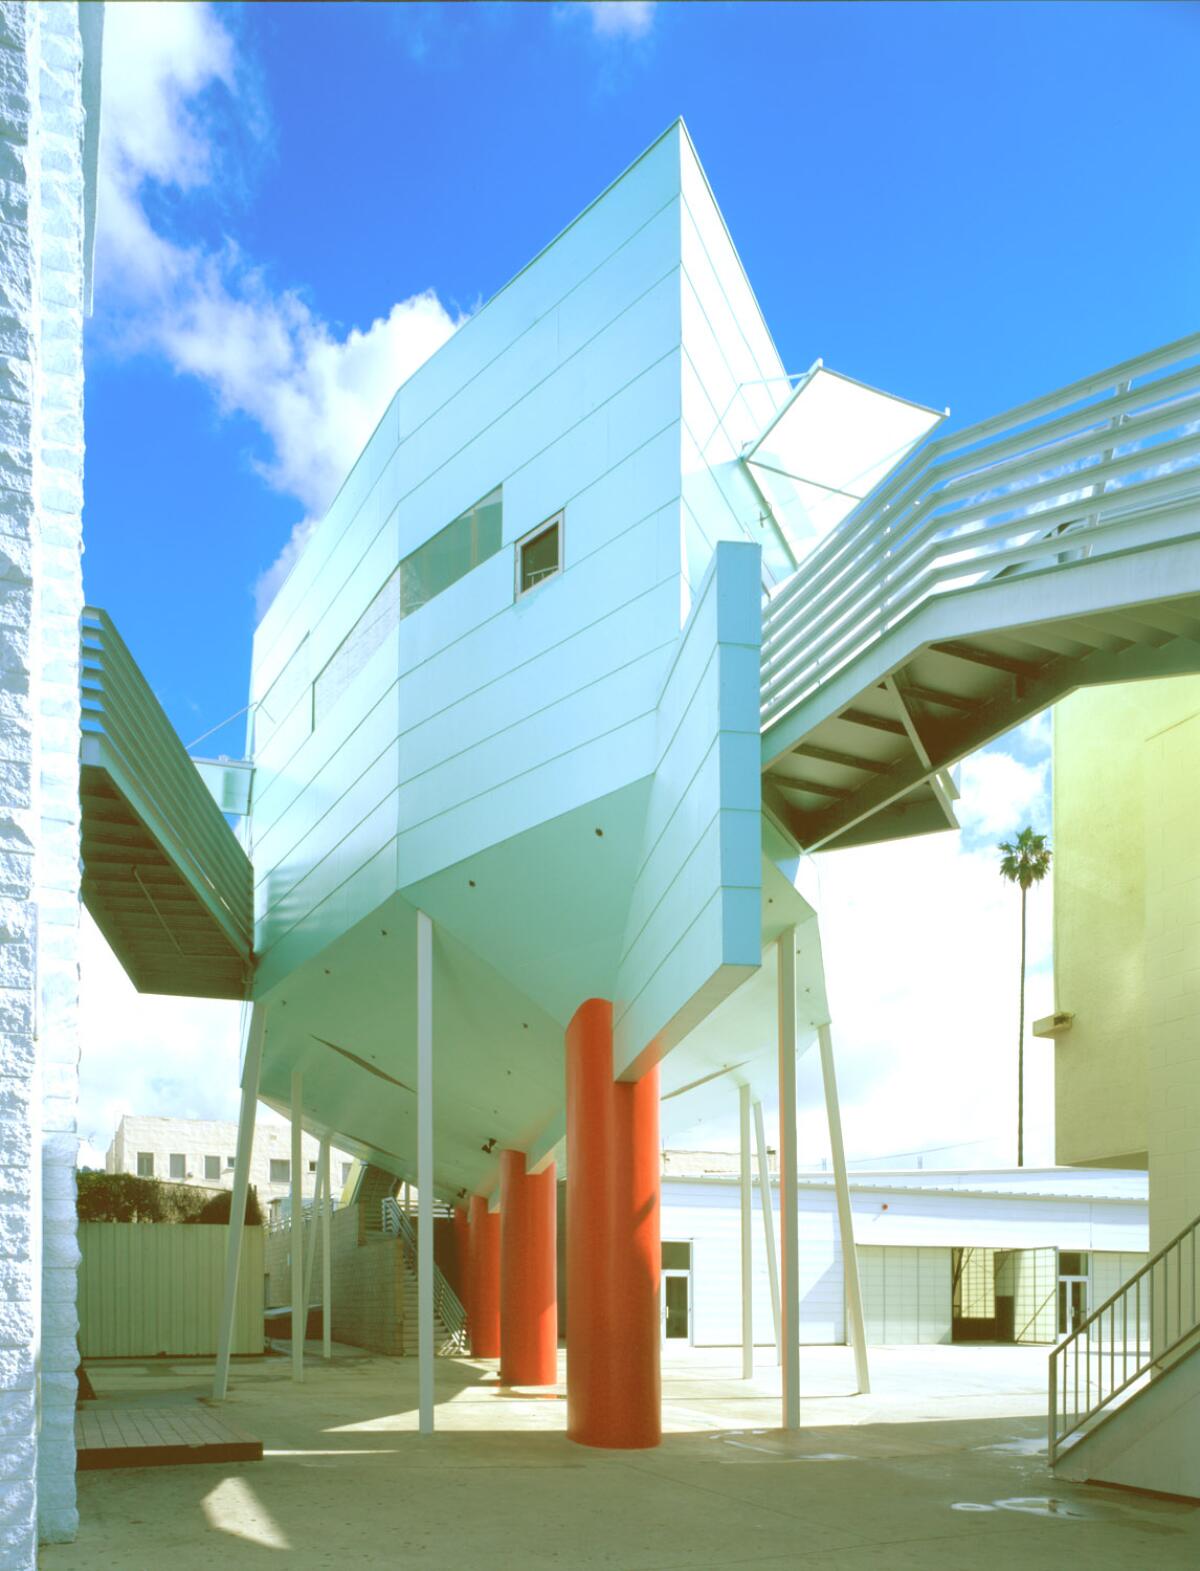 A light blue building whose form evokes a ship sits on red pilotis over a courtyard area